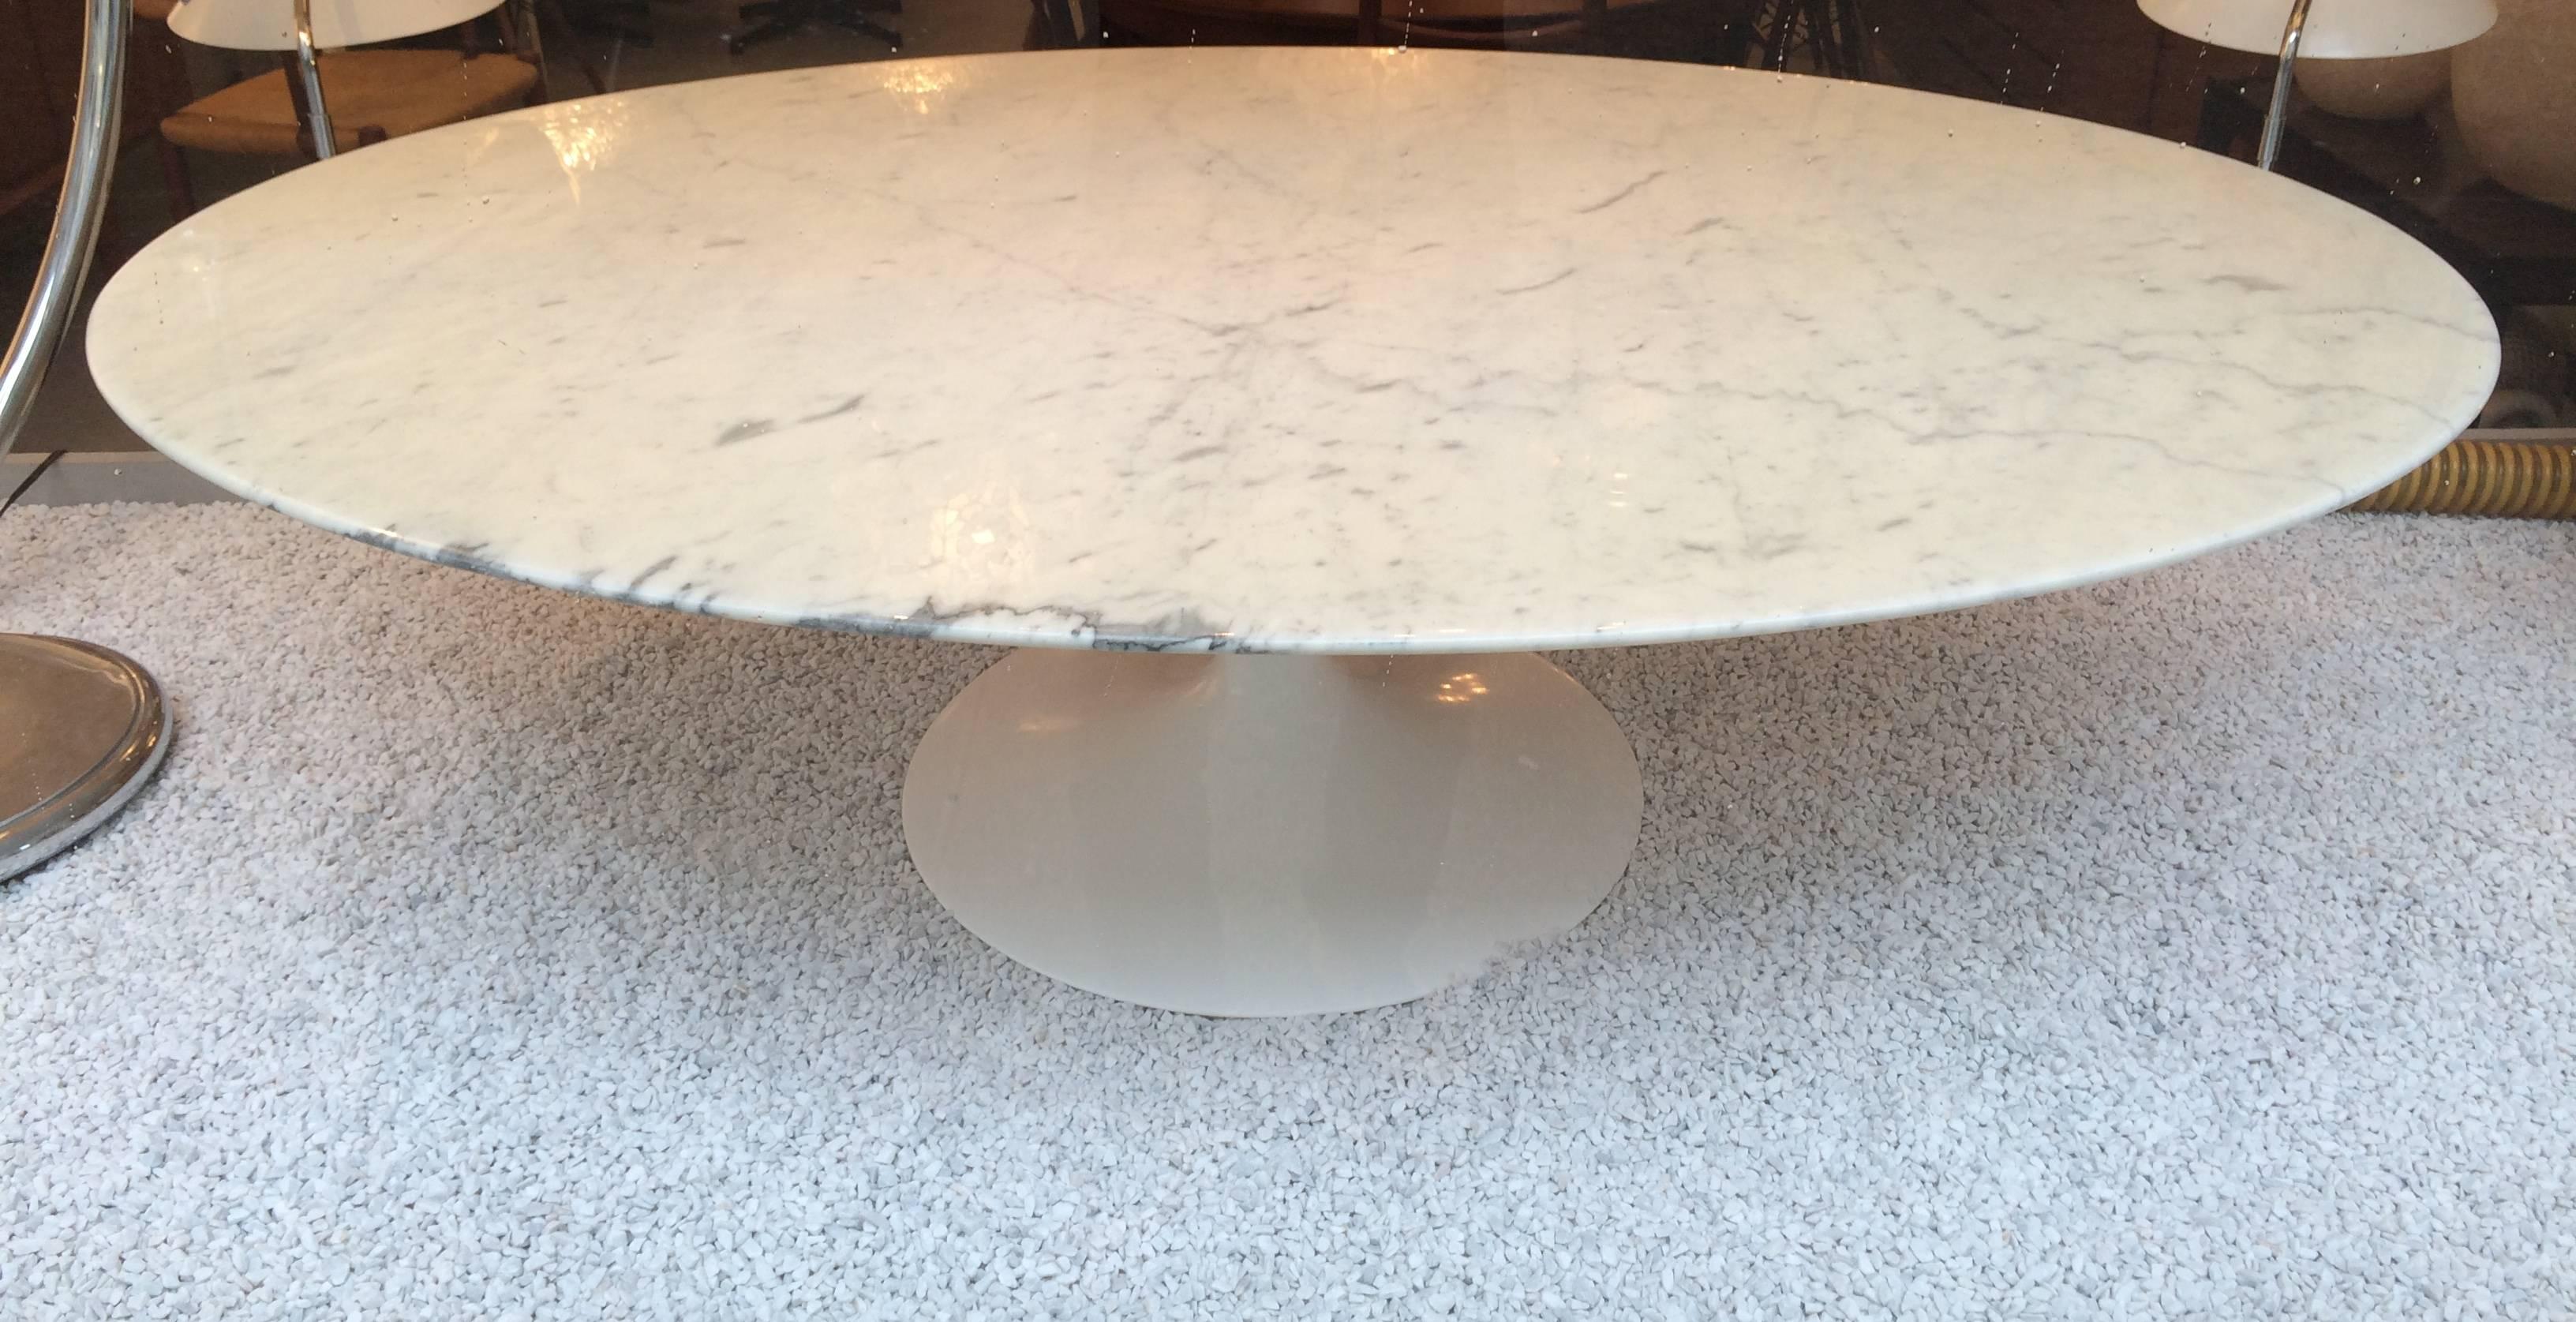 Marble oval coffee table by Eero Saarinen for Knoll International.
Signed at the bottom of the base.
Very nice condition.
 